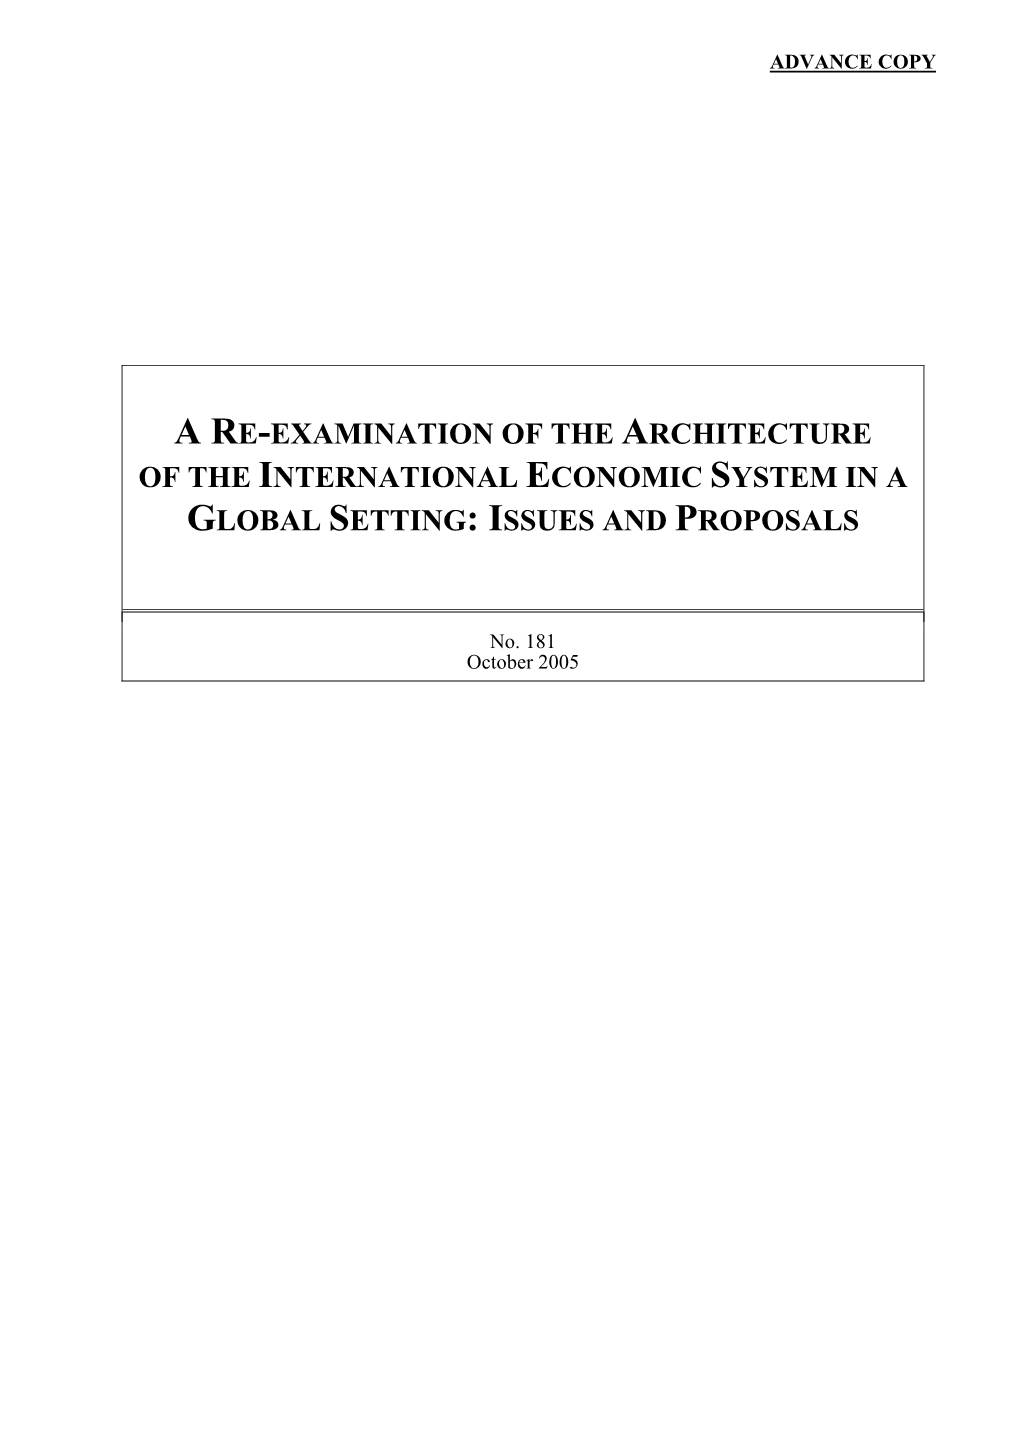 A Re-Examination of the Architecture of the International Economic System in a Global Setting: Issues and Proposals